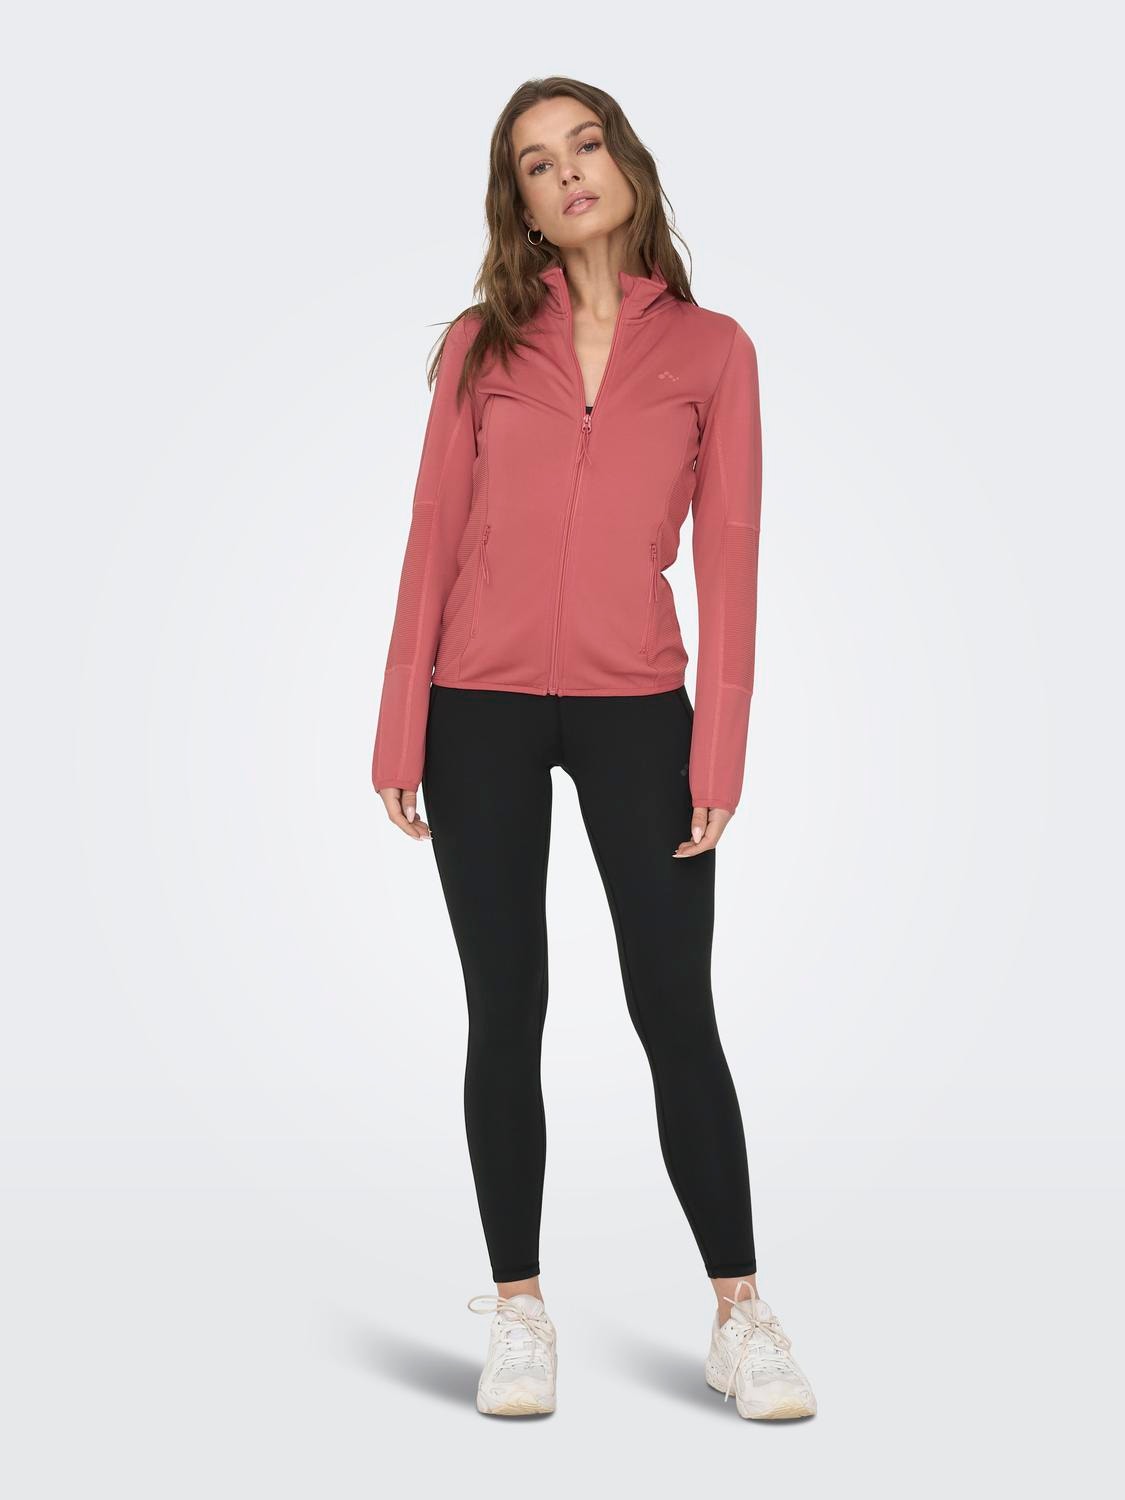 ONLY High neck Jacket -Mineral Red - 15233181